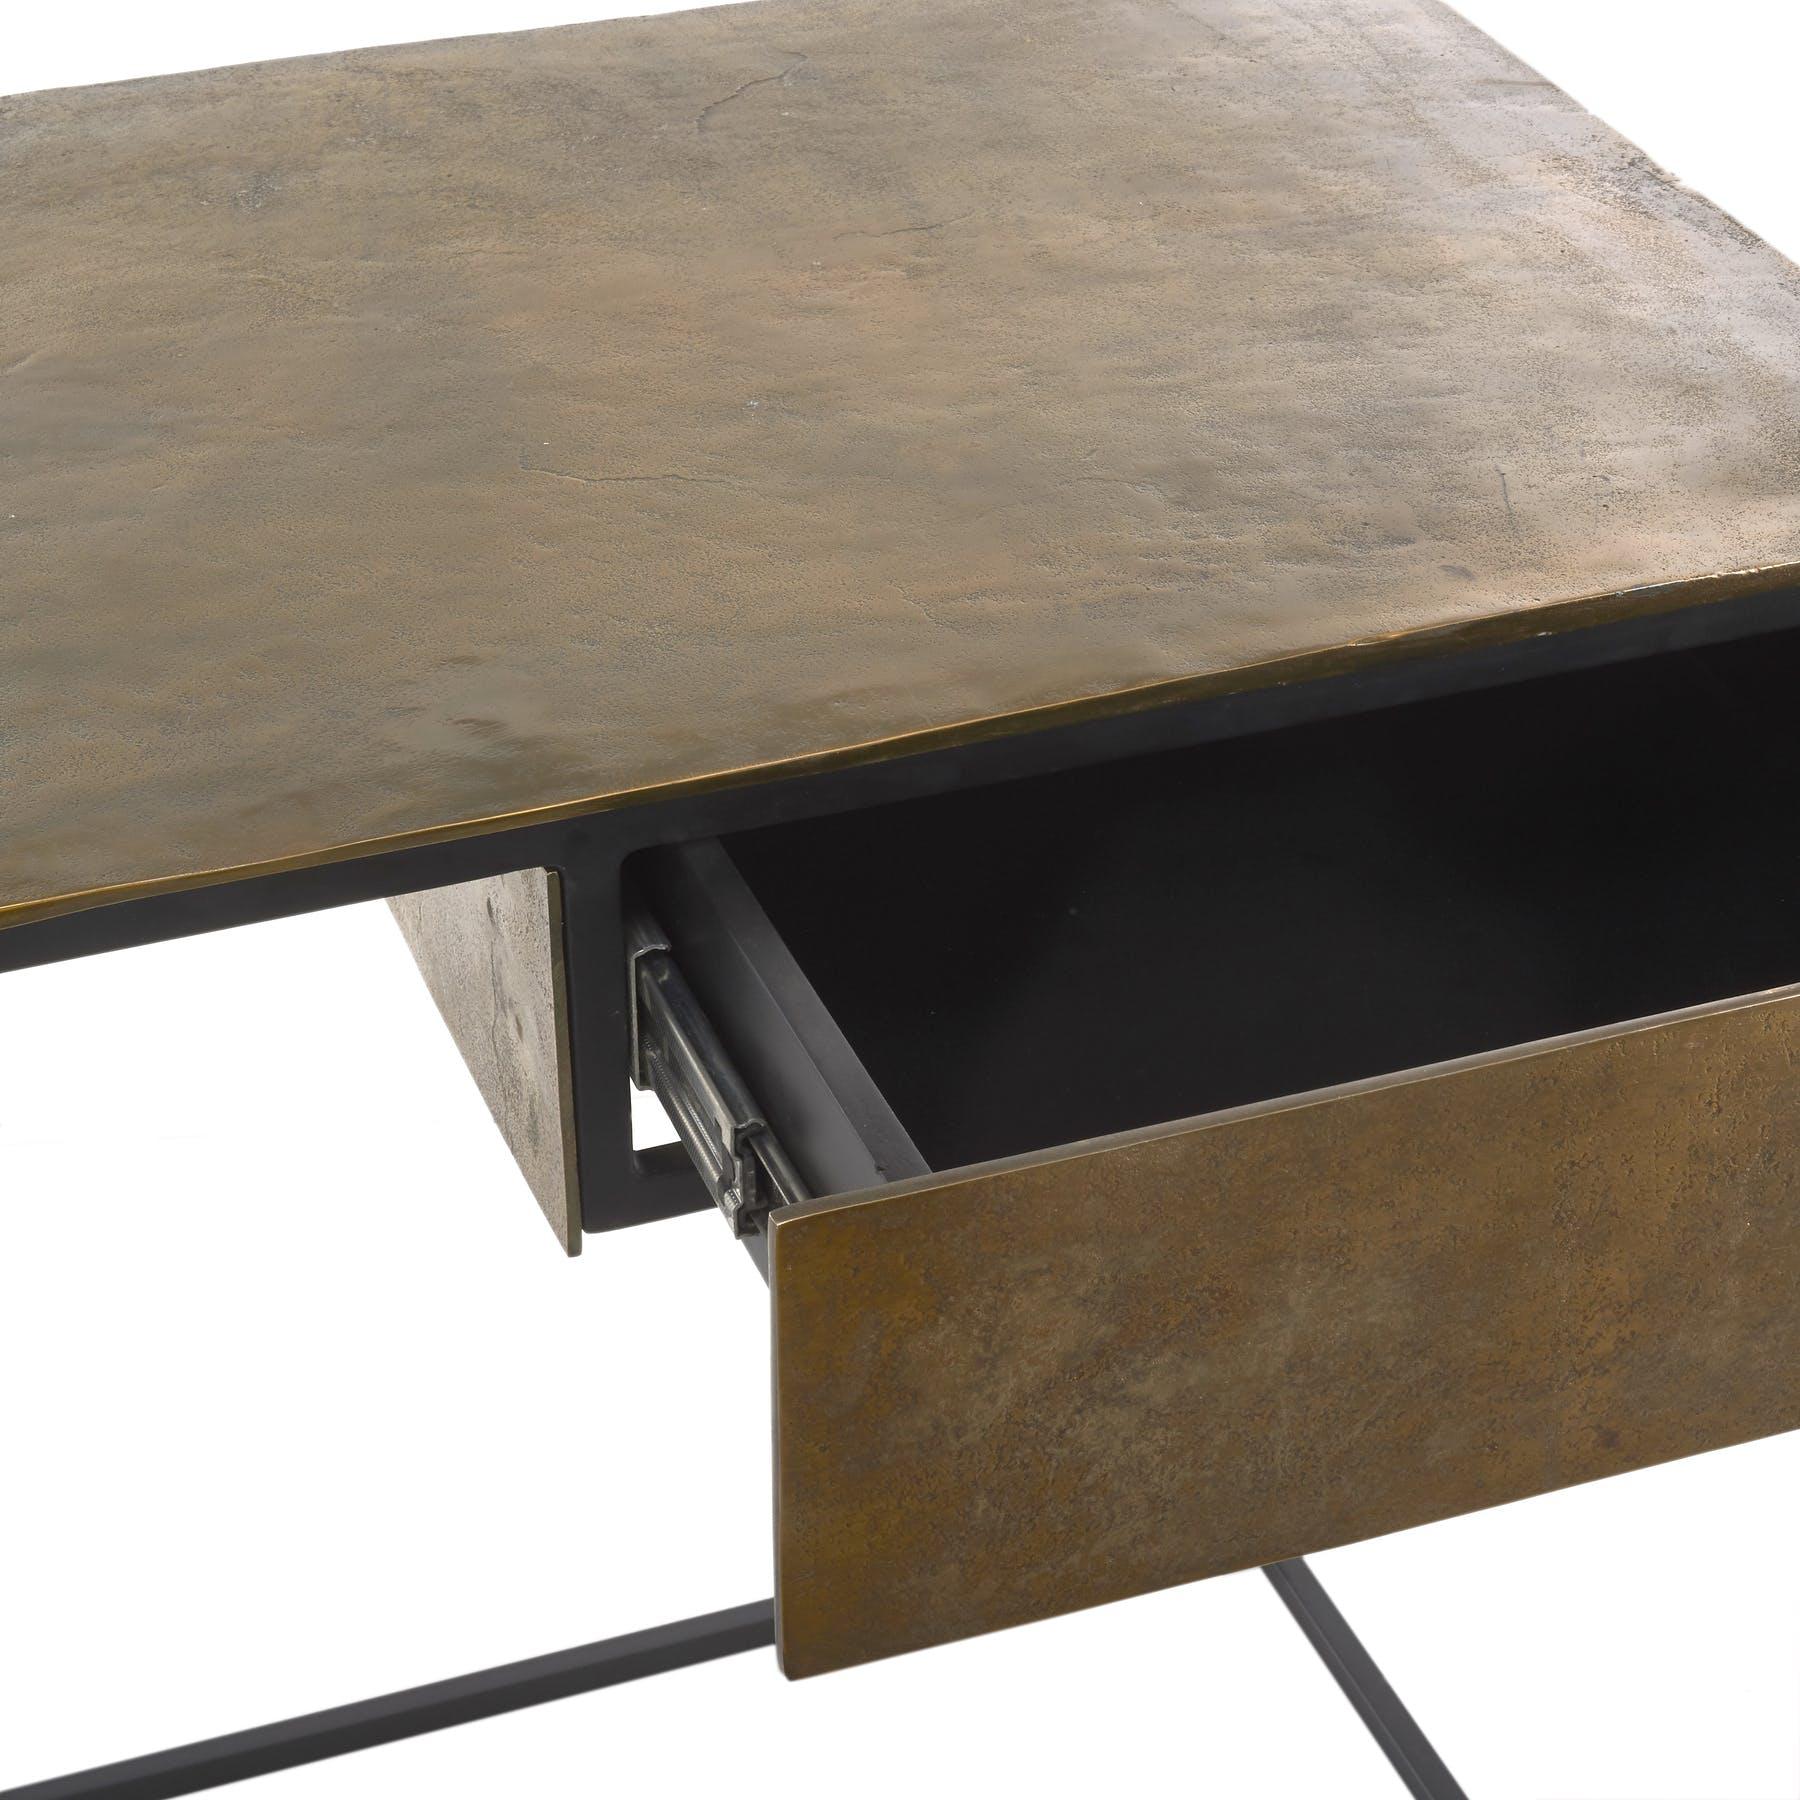 Antique brass-plated desk, Pols Potten Studio
Dimensions: W 120.5 x D 51 x H 75.5 cm
Materials: Black powder coated iron frame, aluminium, antique brass plated top


Pols Potten products are characterised by a modern twist on Traditional